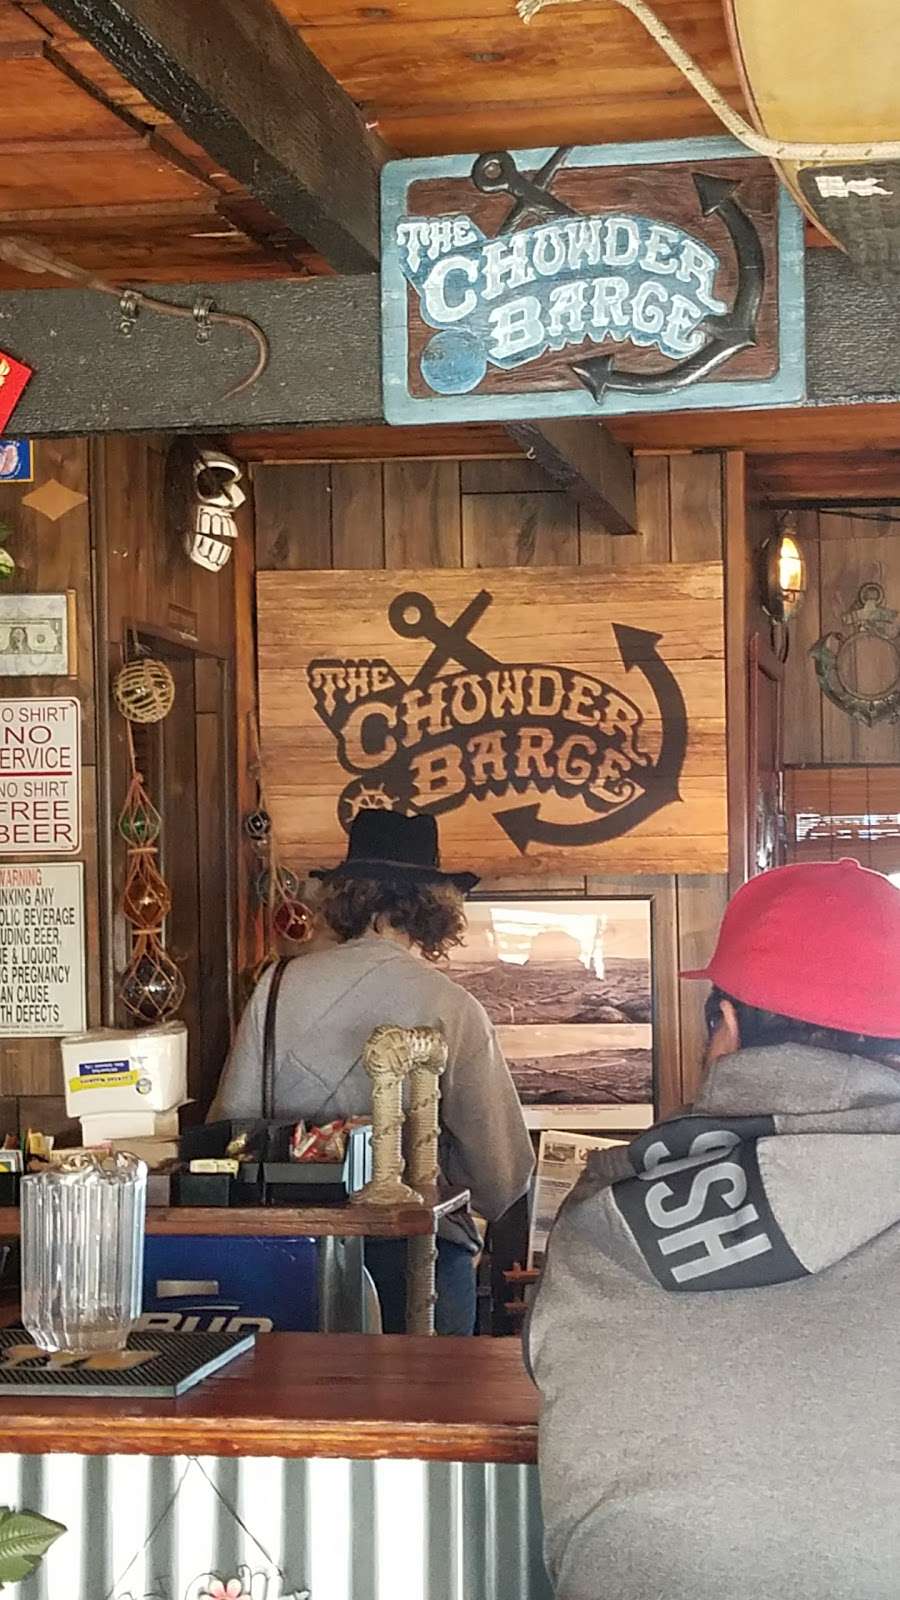 Chowder Barge | 611 N Henry Ford Ave, Wilmington, CA 90744 | Phone: (310) 830-7937